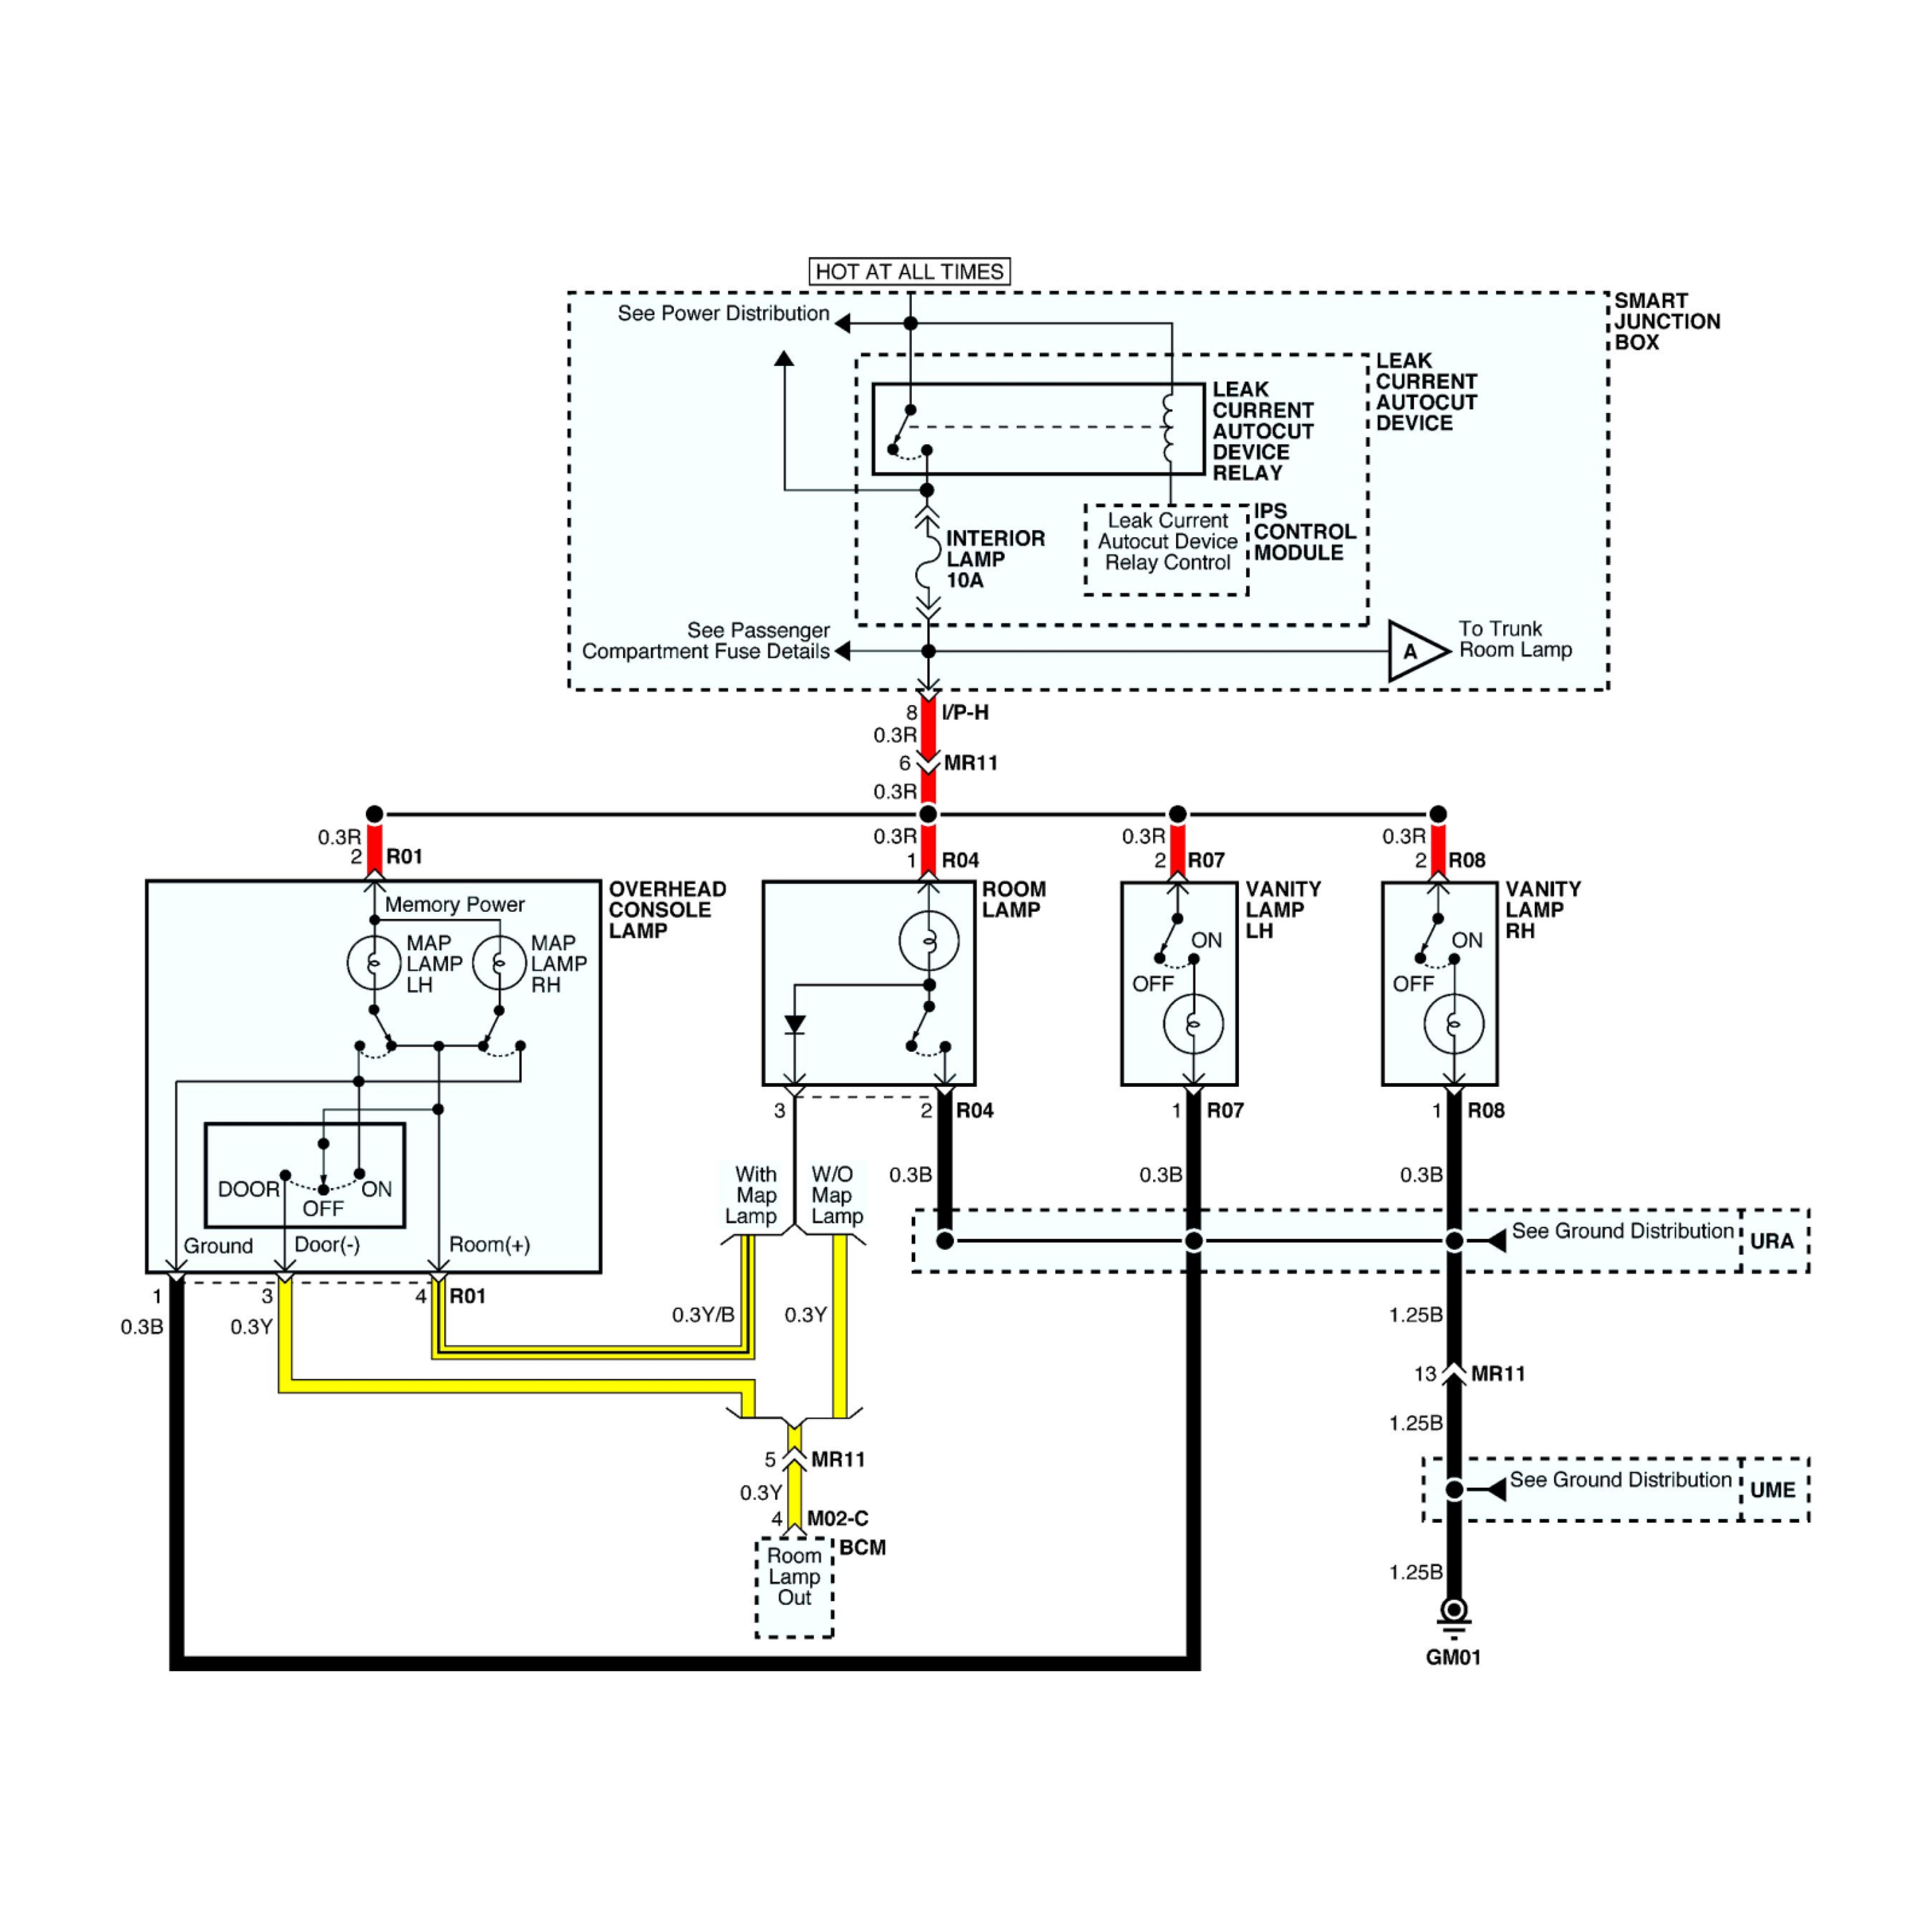 2003 Mercedes-Benz S500 wiring diagrams example